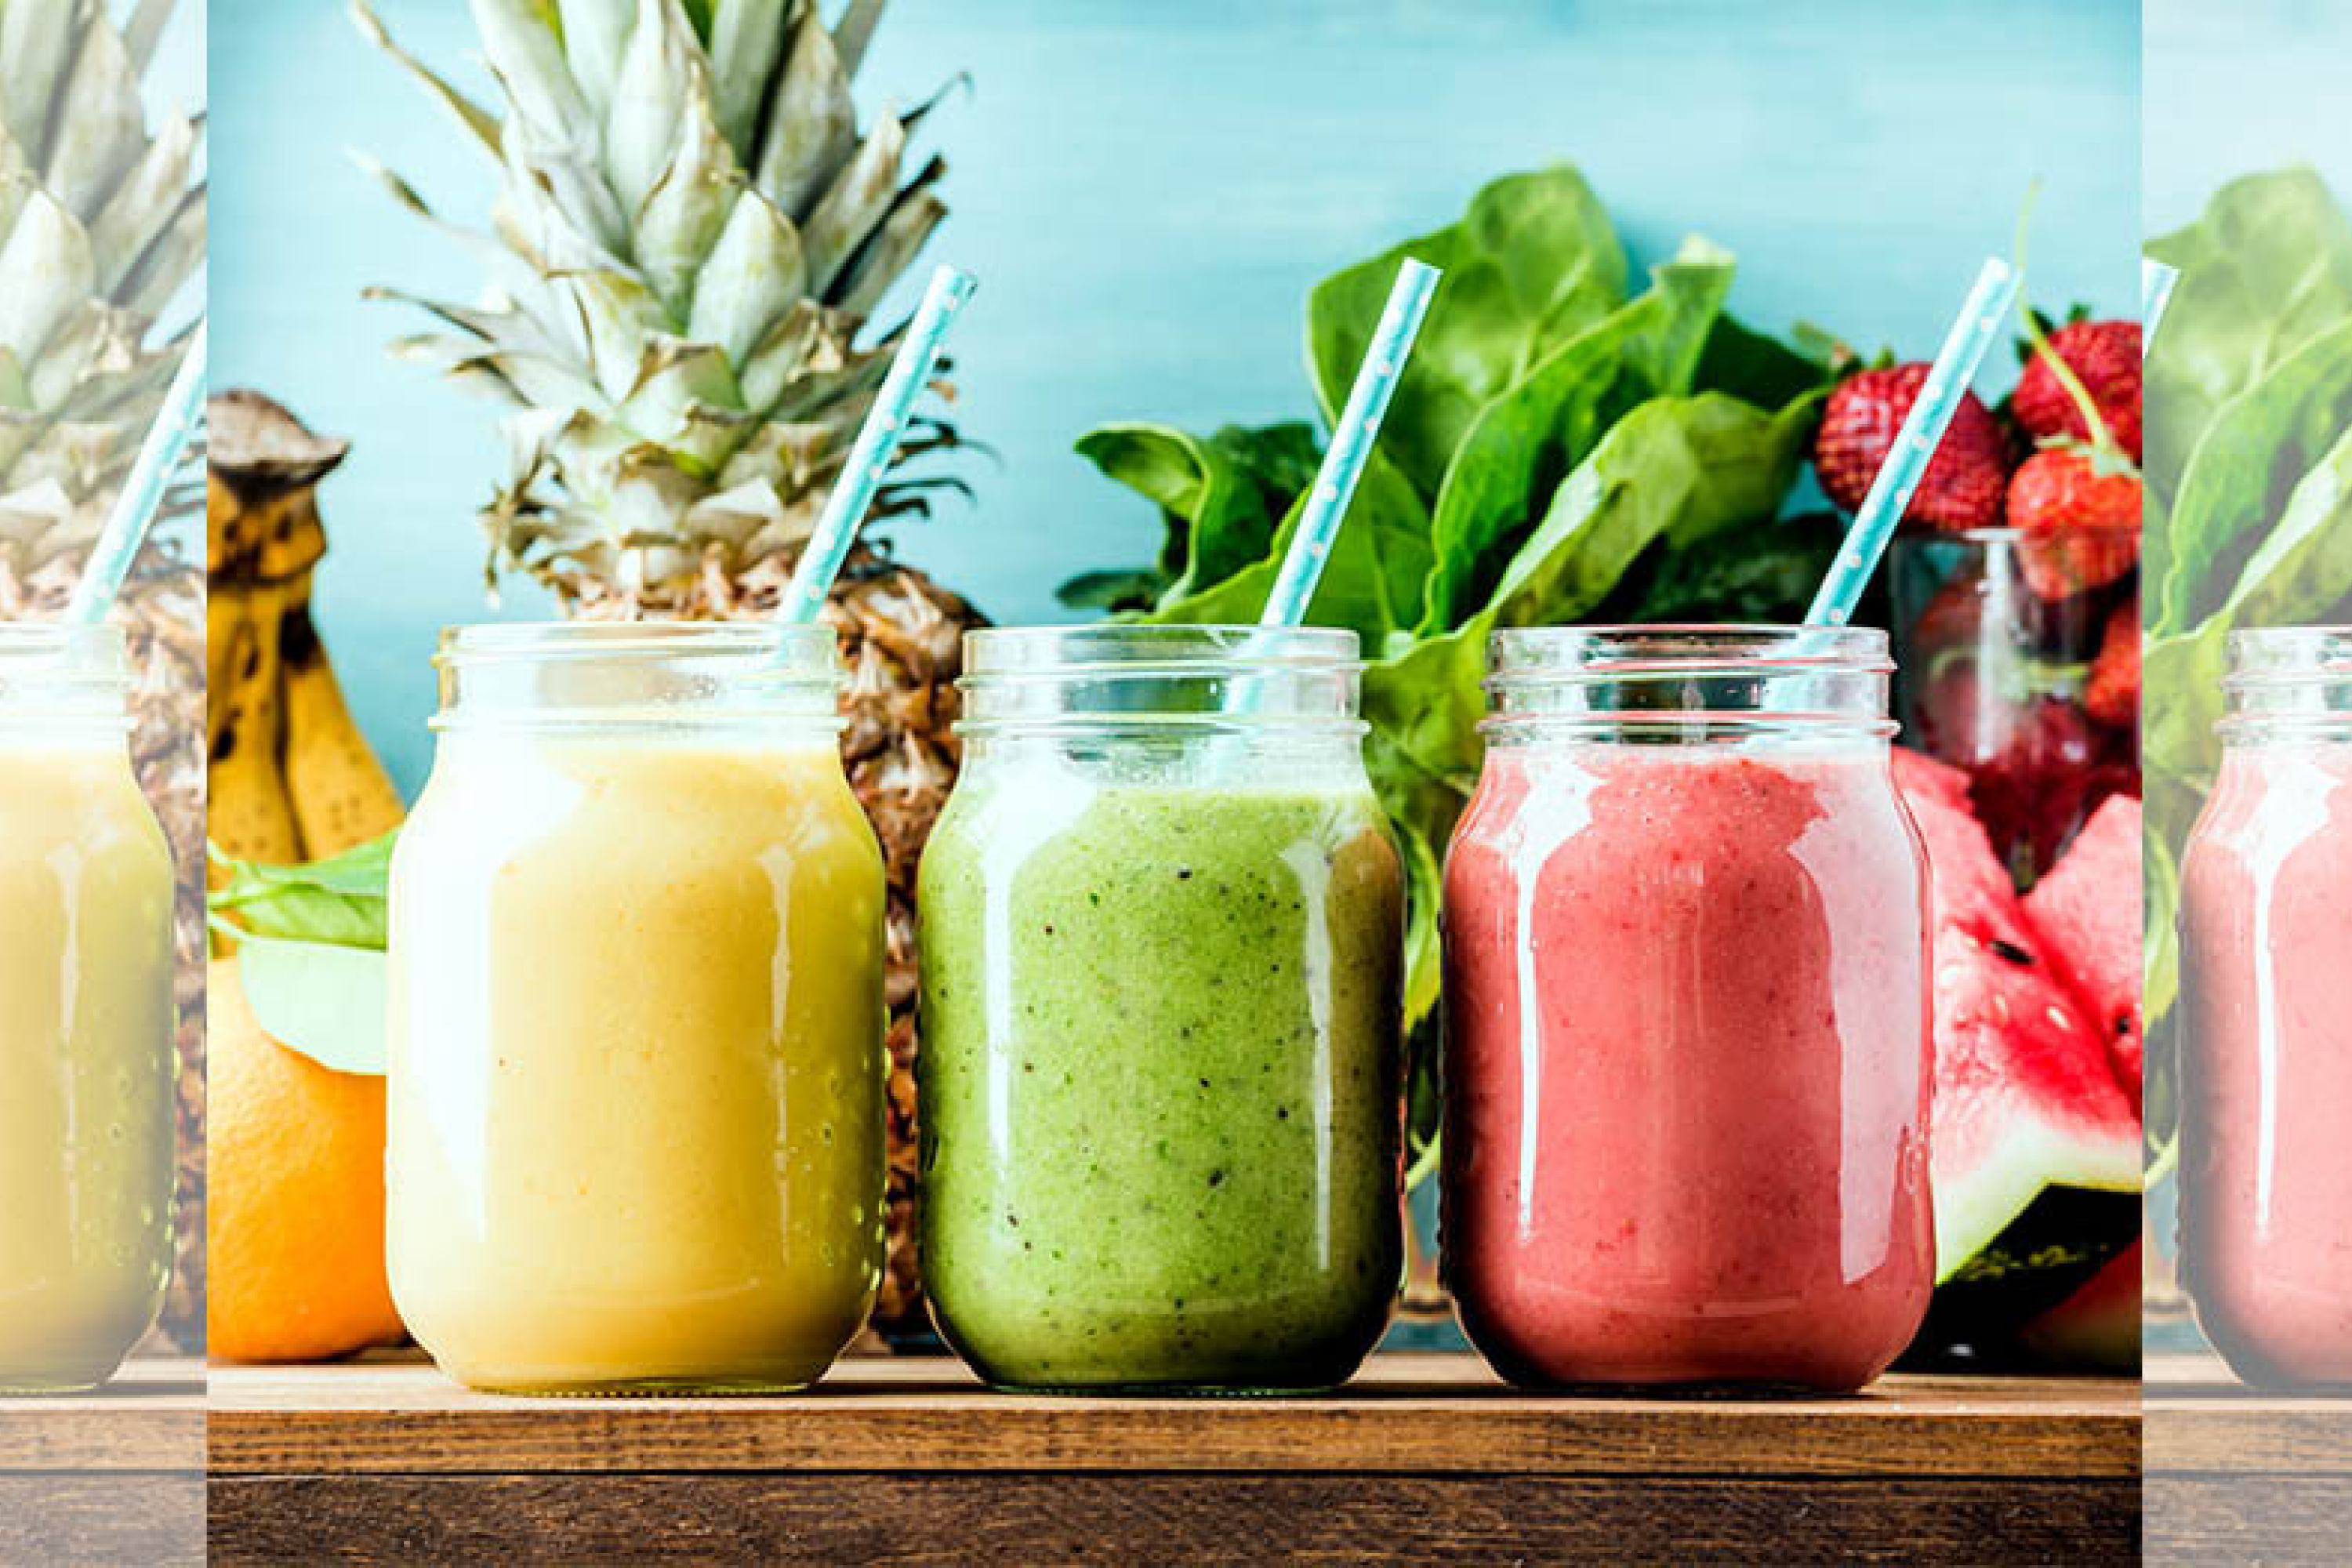 Sip Your Way to Health: Why a Daily Millet-Based Smoothie Should Be Your Routine